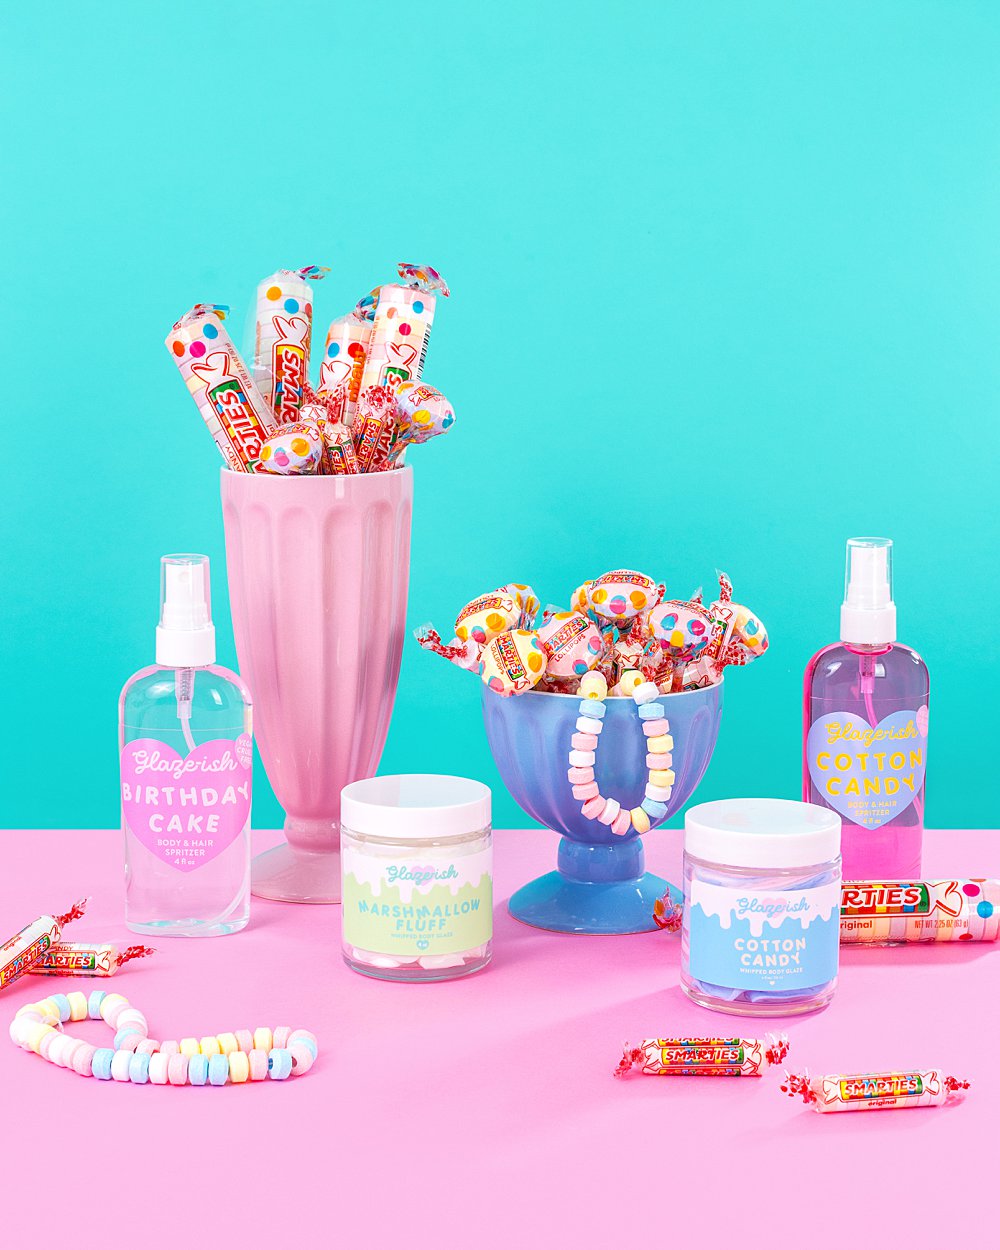 Colourful content creation and creative still life photography for Glzeish skincare collaboration with Smarties. Playful product photography, art direction and styling by HIYA MARIANNE.